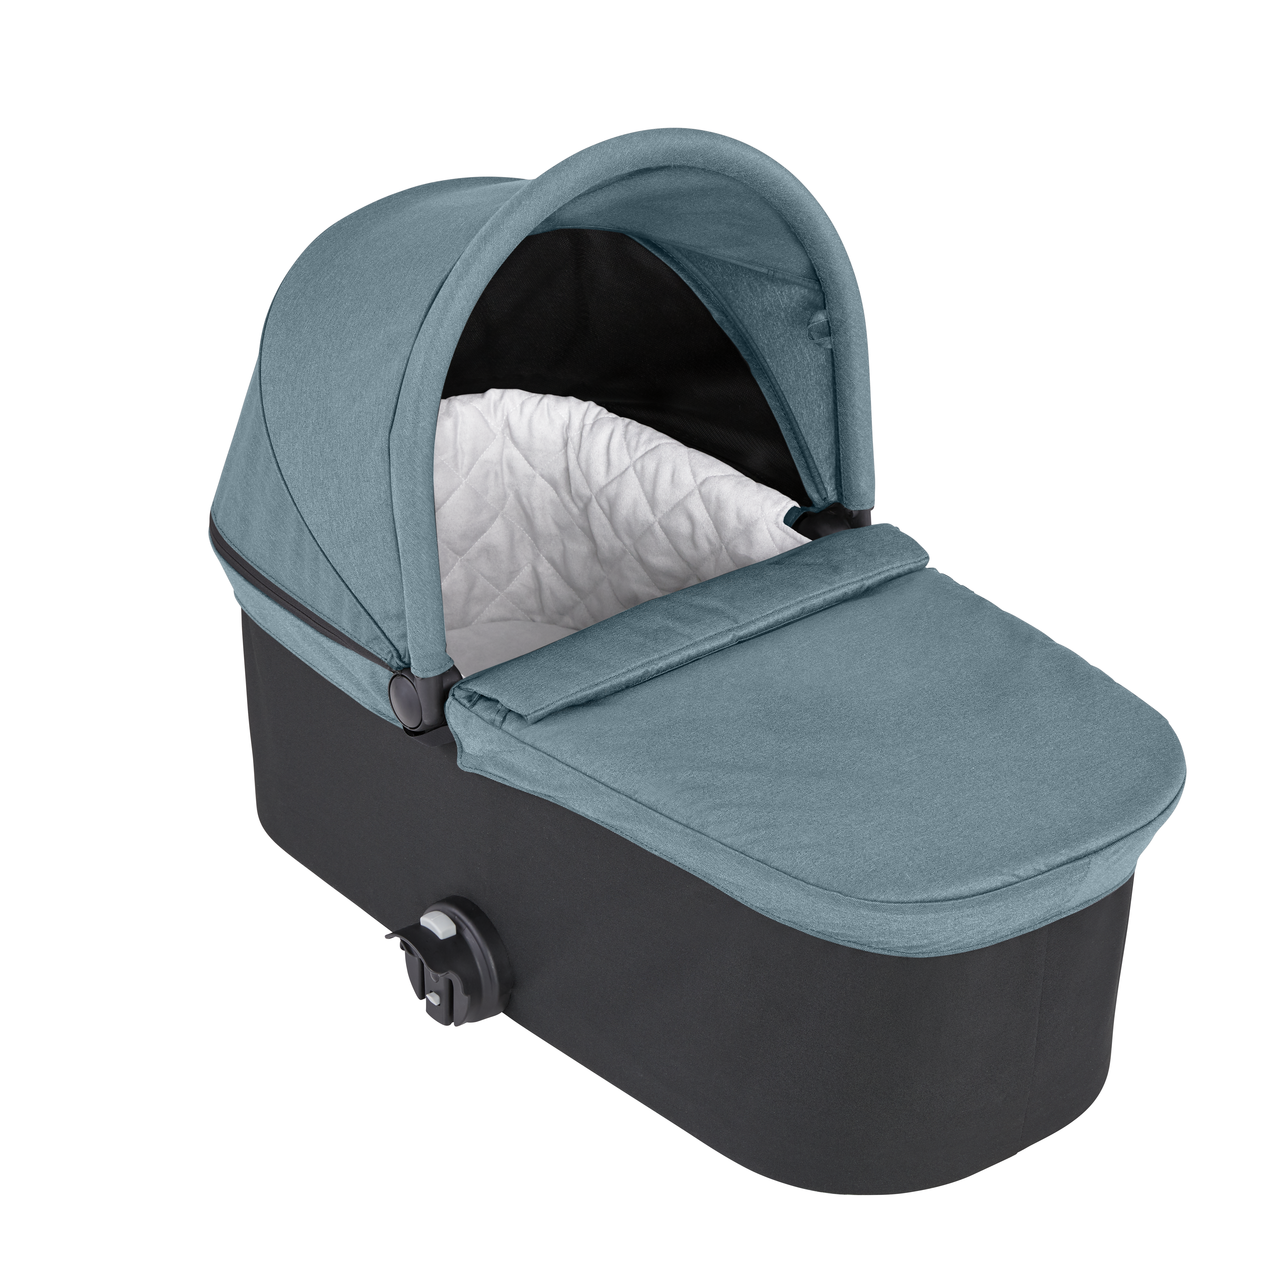 baby jogger city tour deluxe